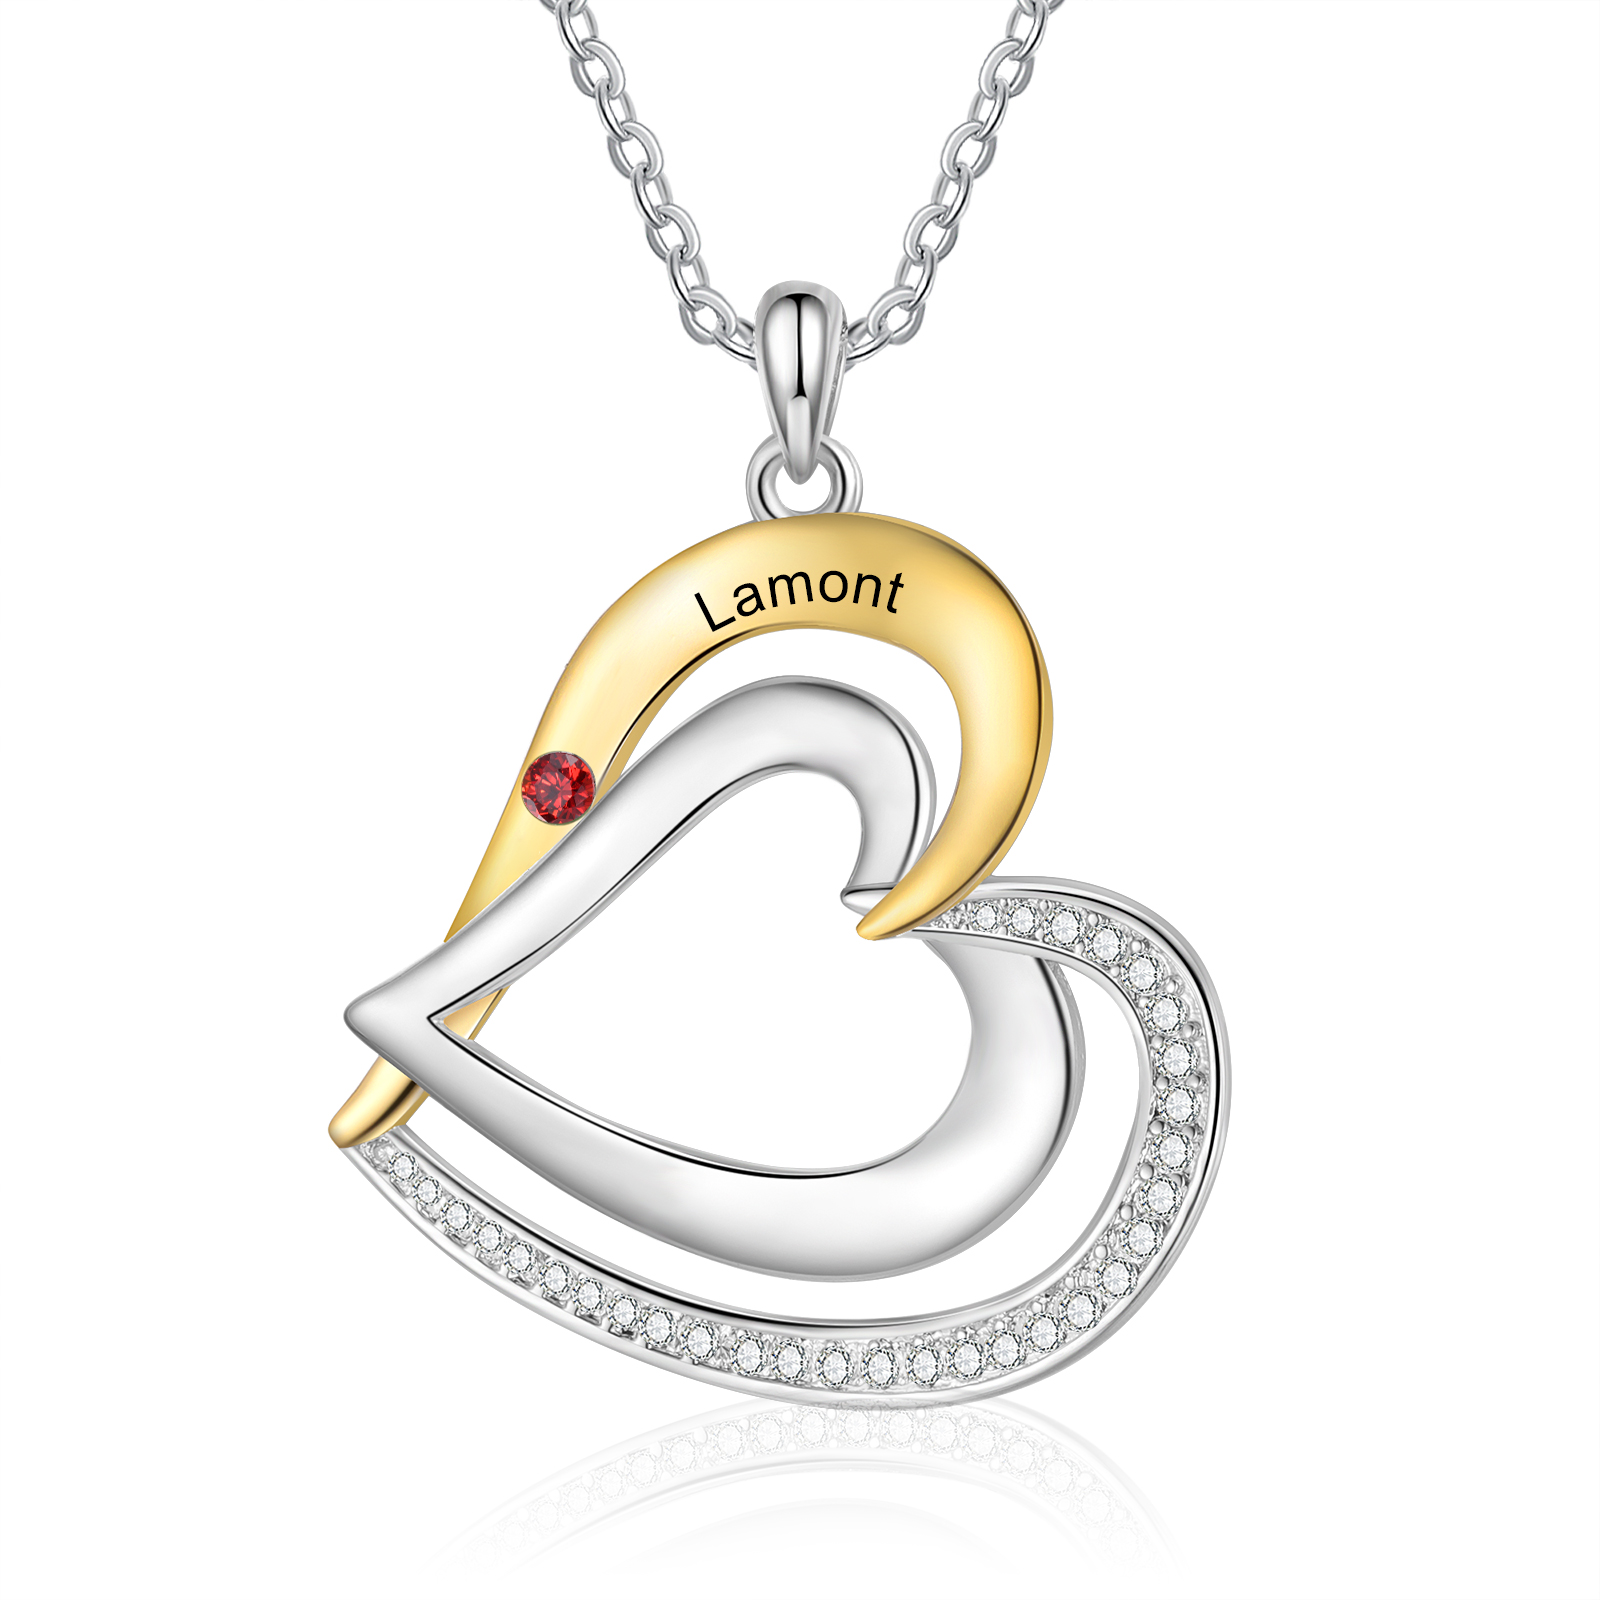 1 Name - Personalized Special Heart Necklace S925 Silver with Birthsto